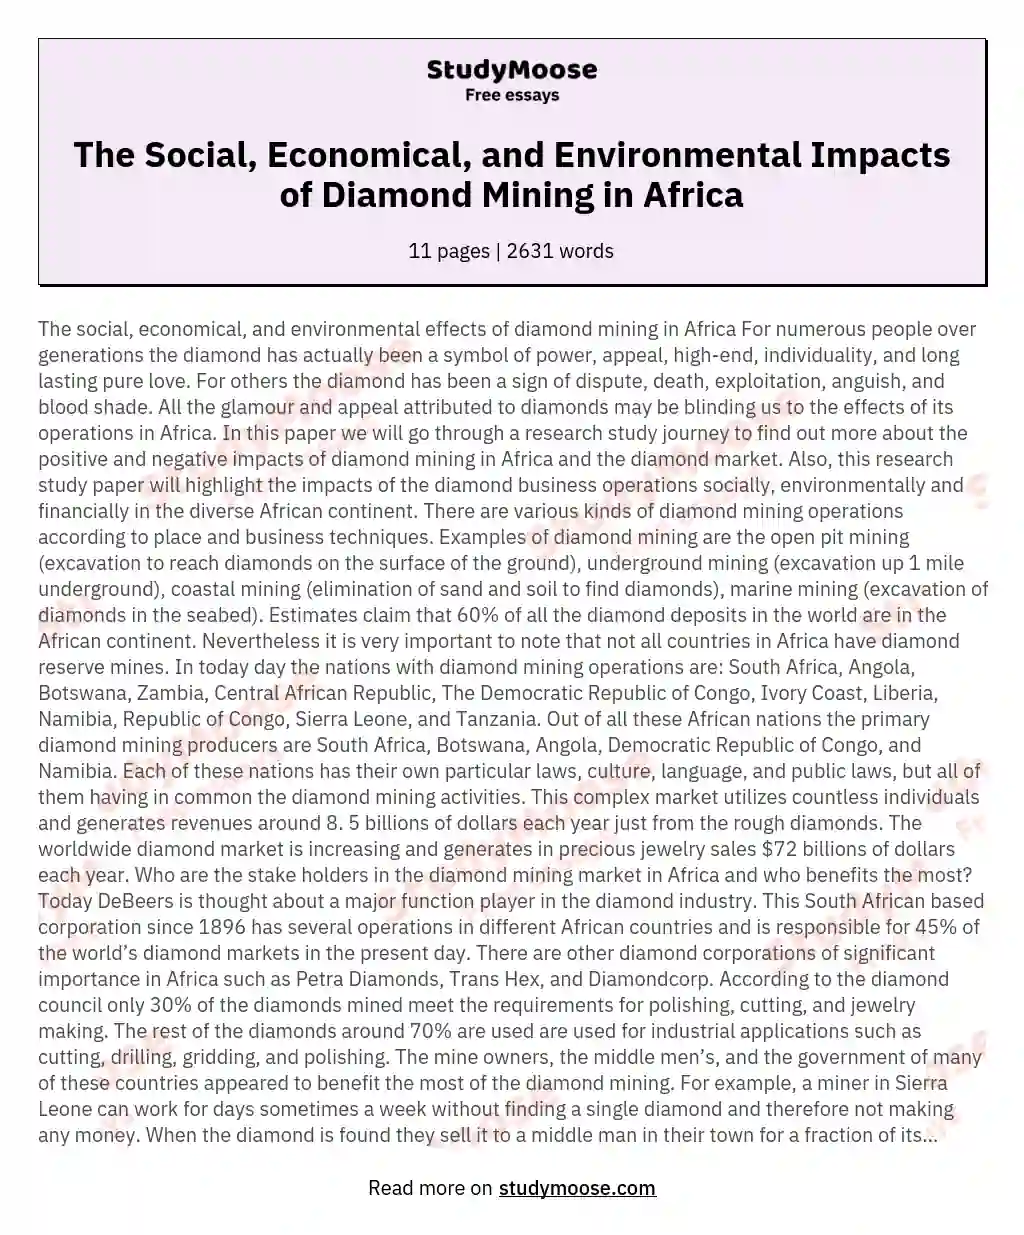 The Social, Economical, and Environmental Impacts of Diamond Mining in Africa essay